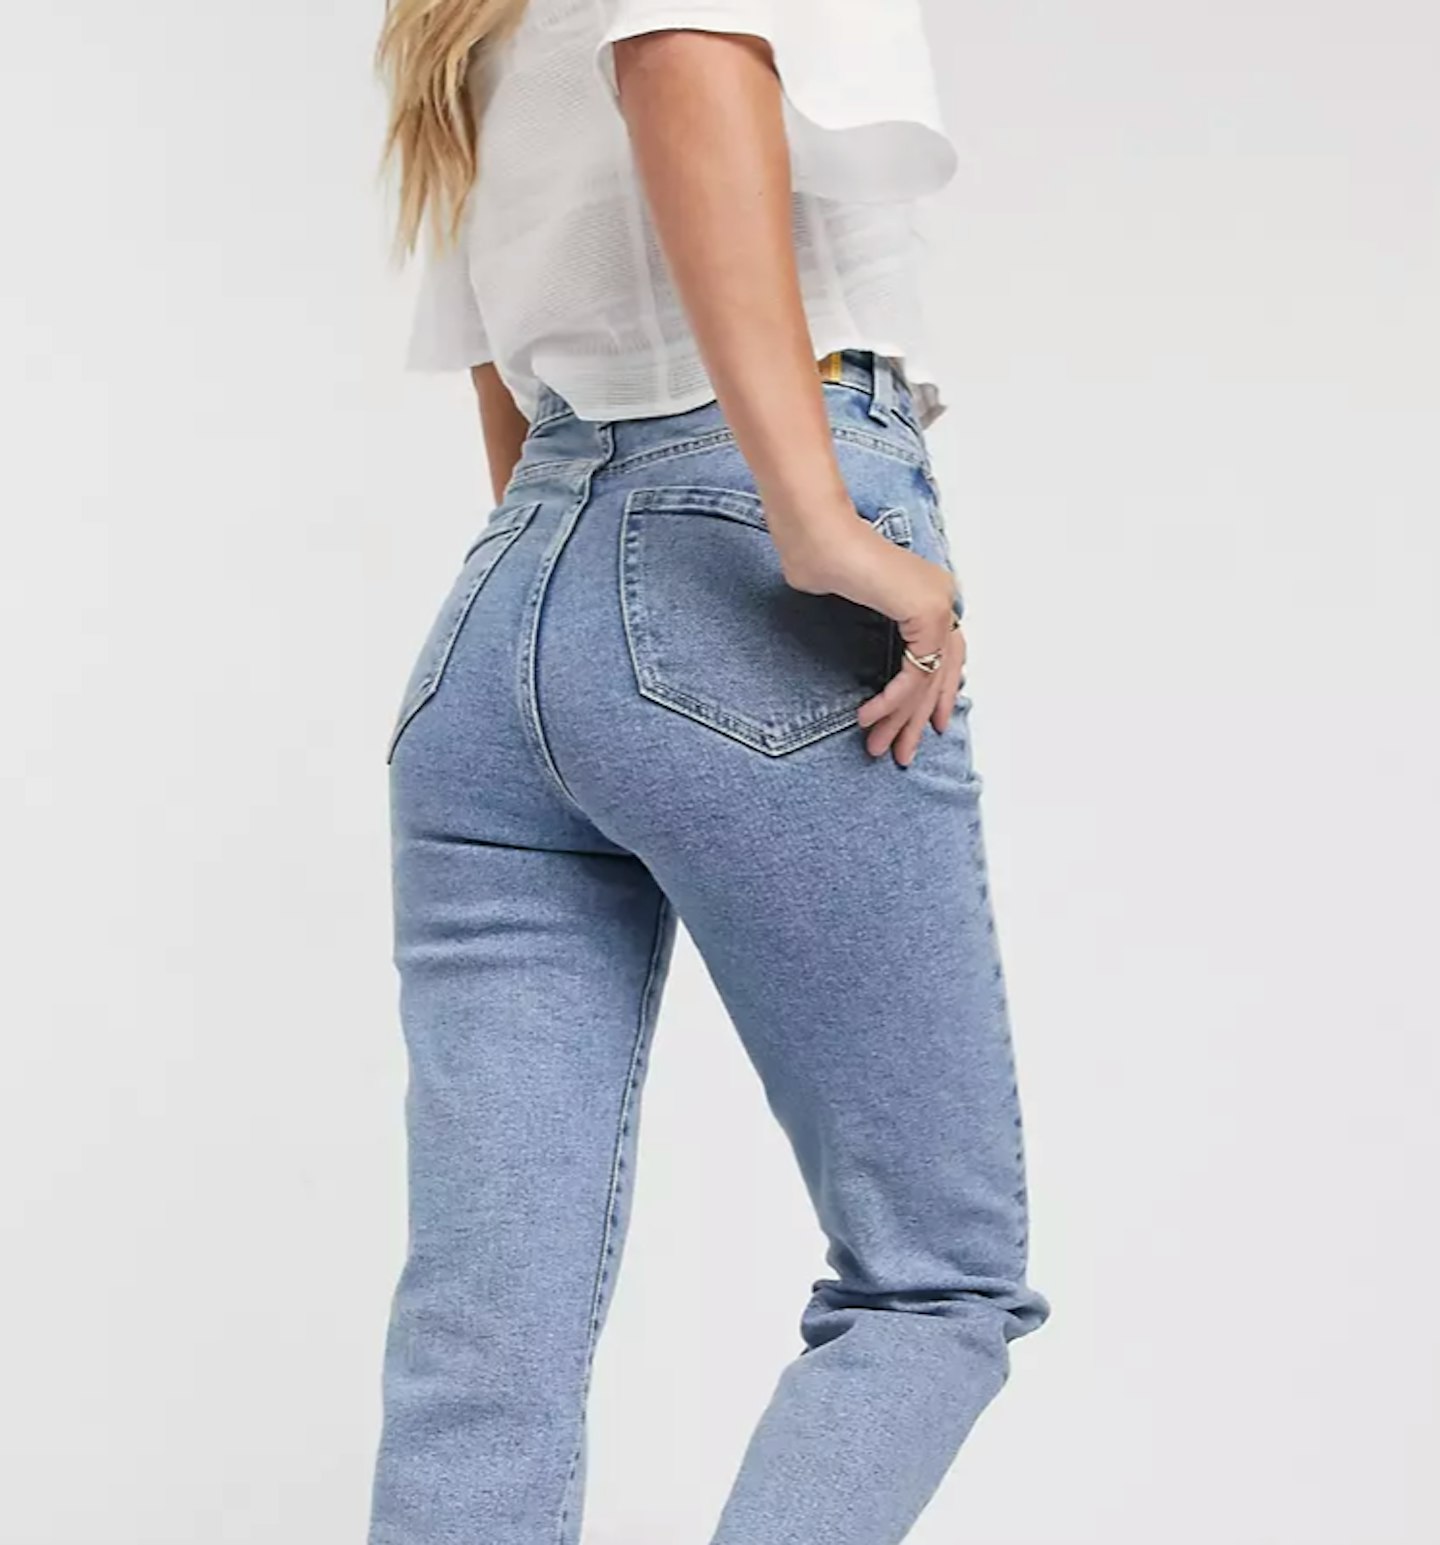 10 Of The Best Mom Jeans That'll Save Your Outfit Every Time - Closer